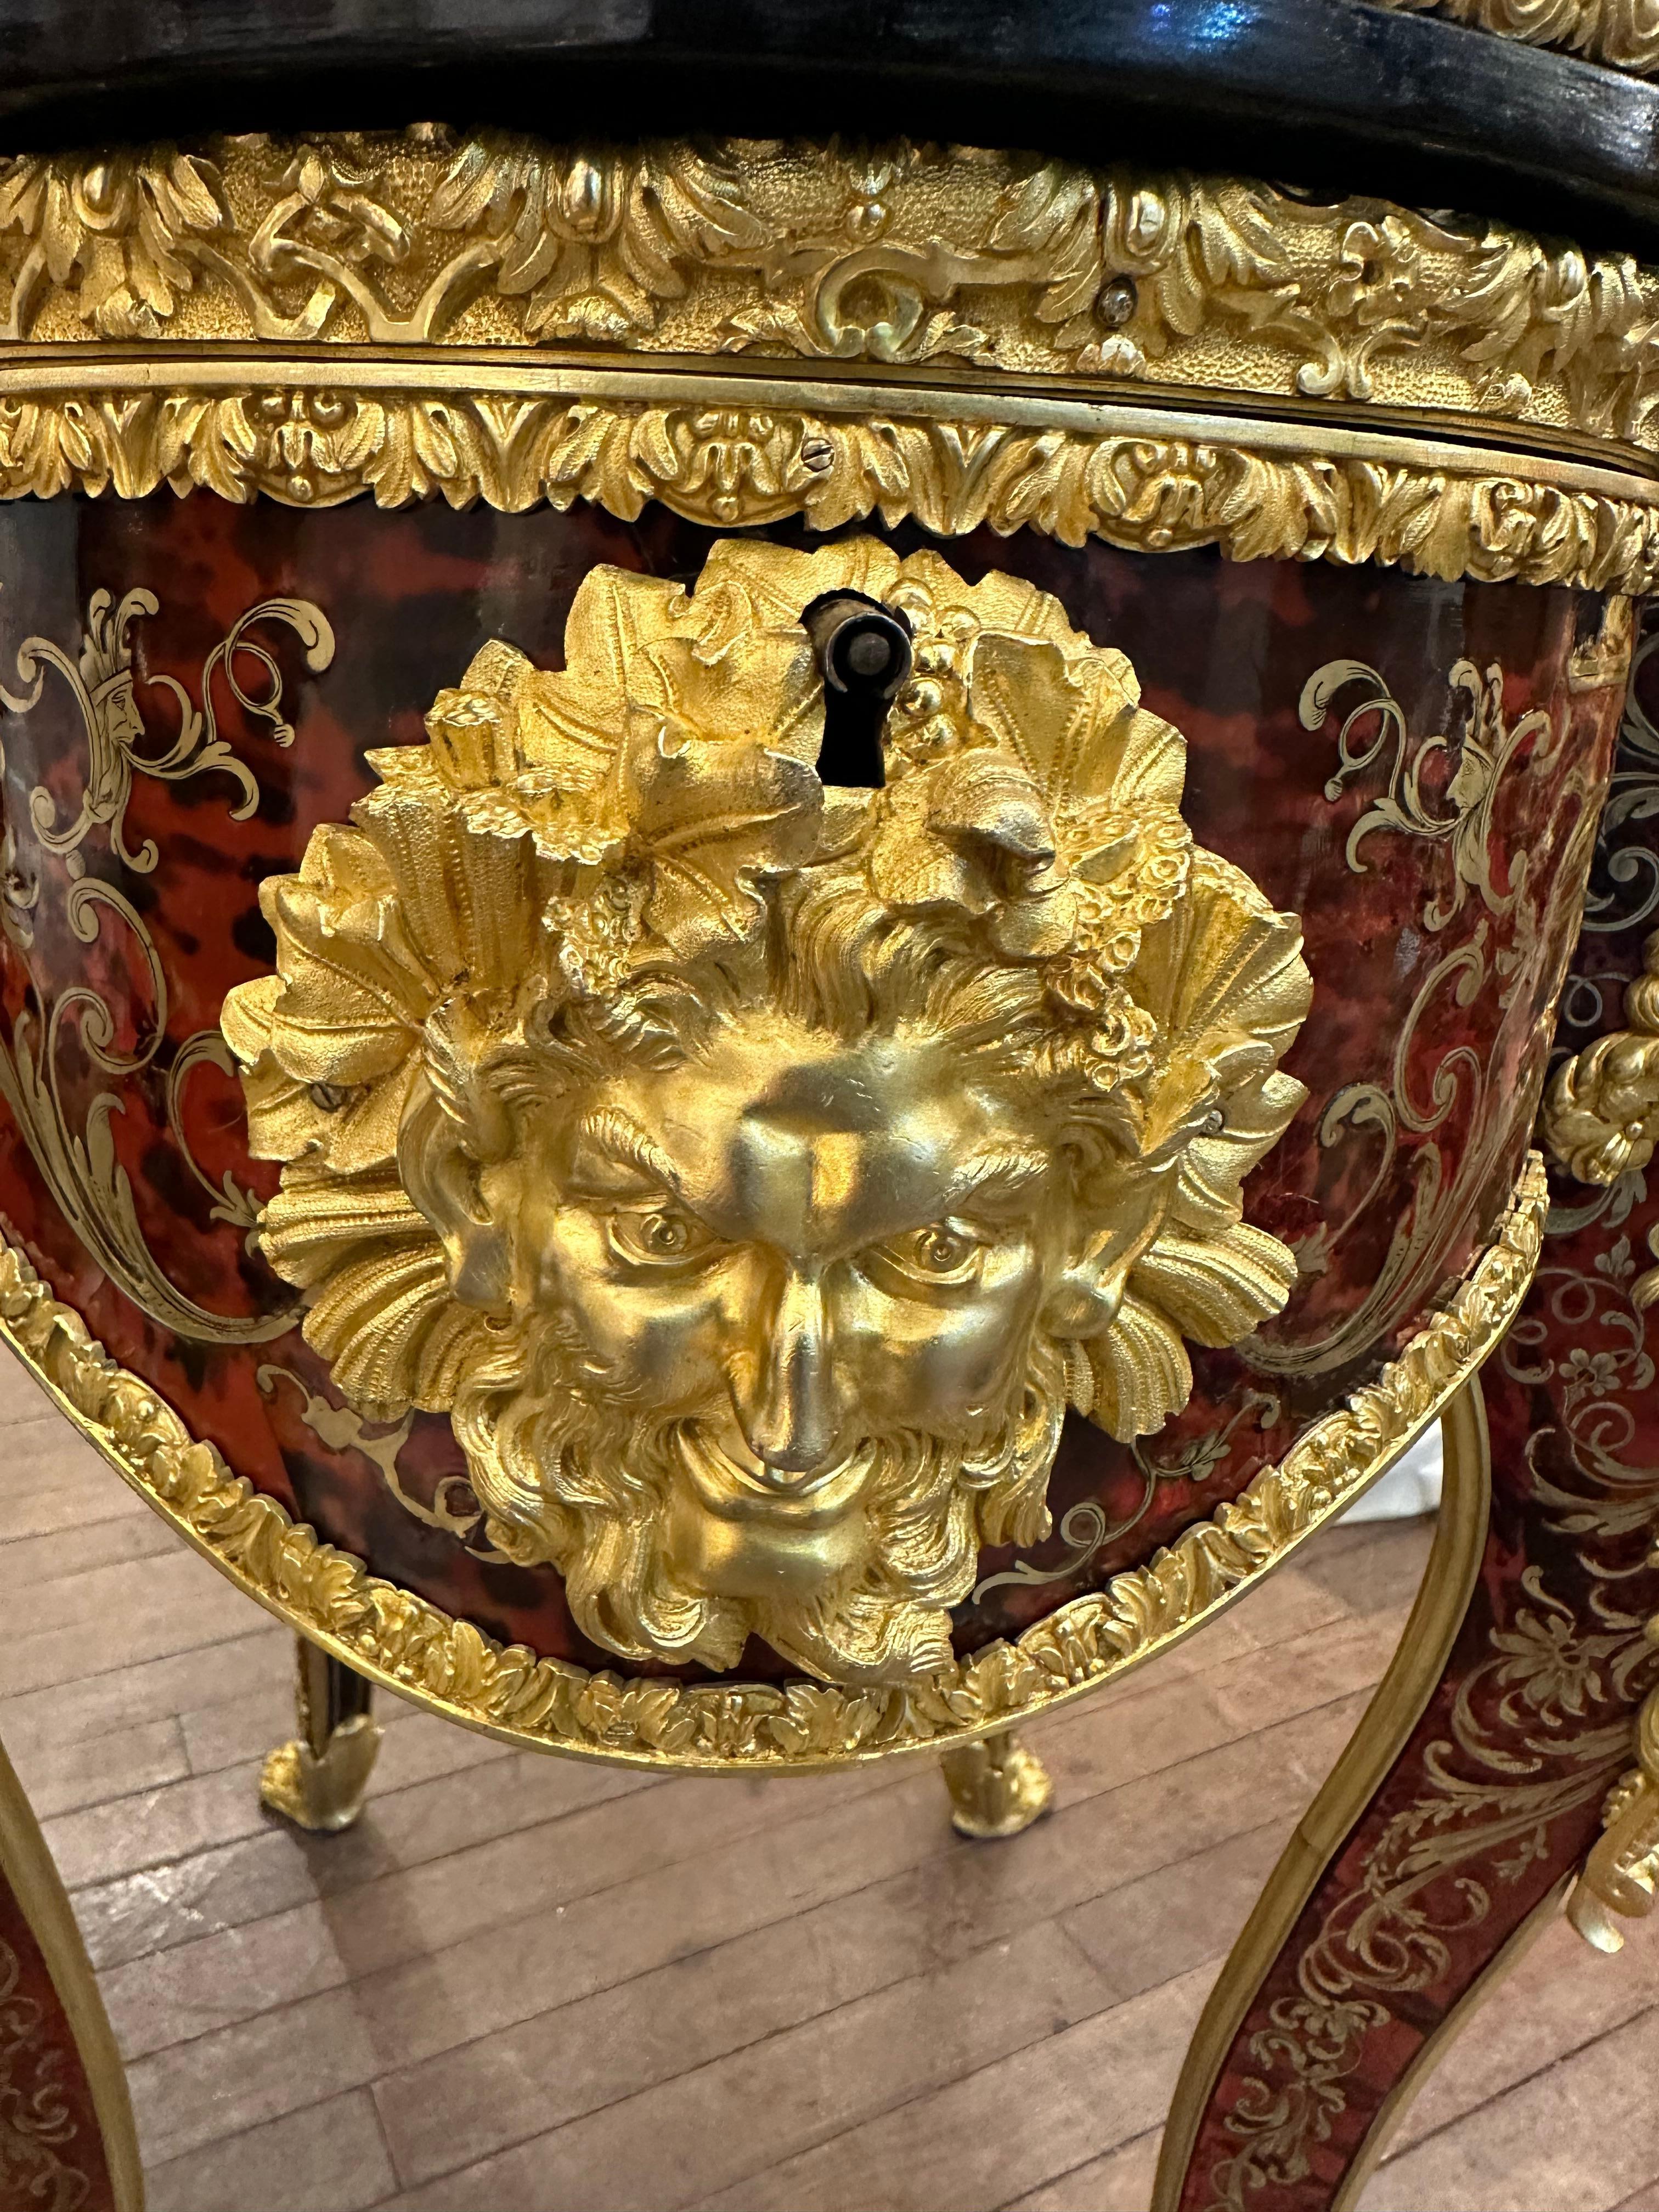 A stunning rare and important signed table attributed to Caillaux,  (Eugène Paul Caillaux, active in the mid–19th century), Paris, ca. 1850/60.
The craftsmanship is of exceptional quality. Polished tortoise shell is complemented with brass inlay in